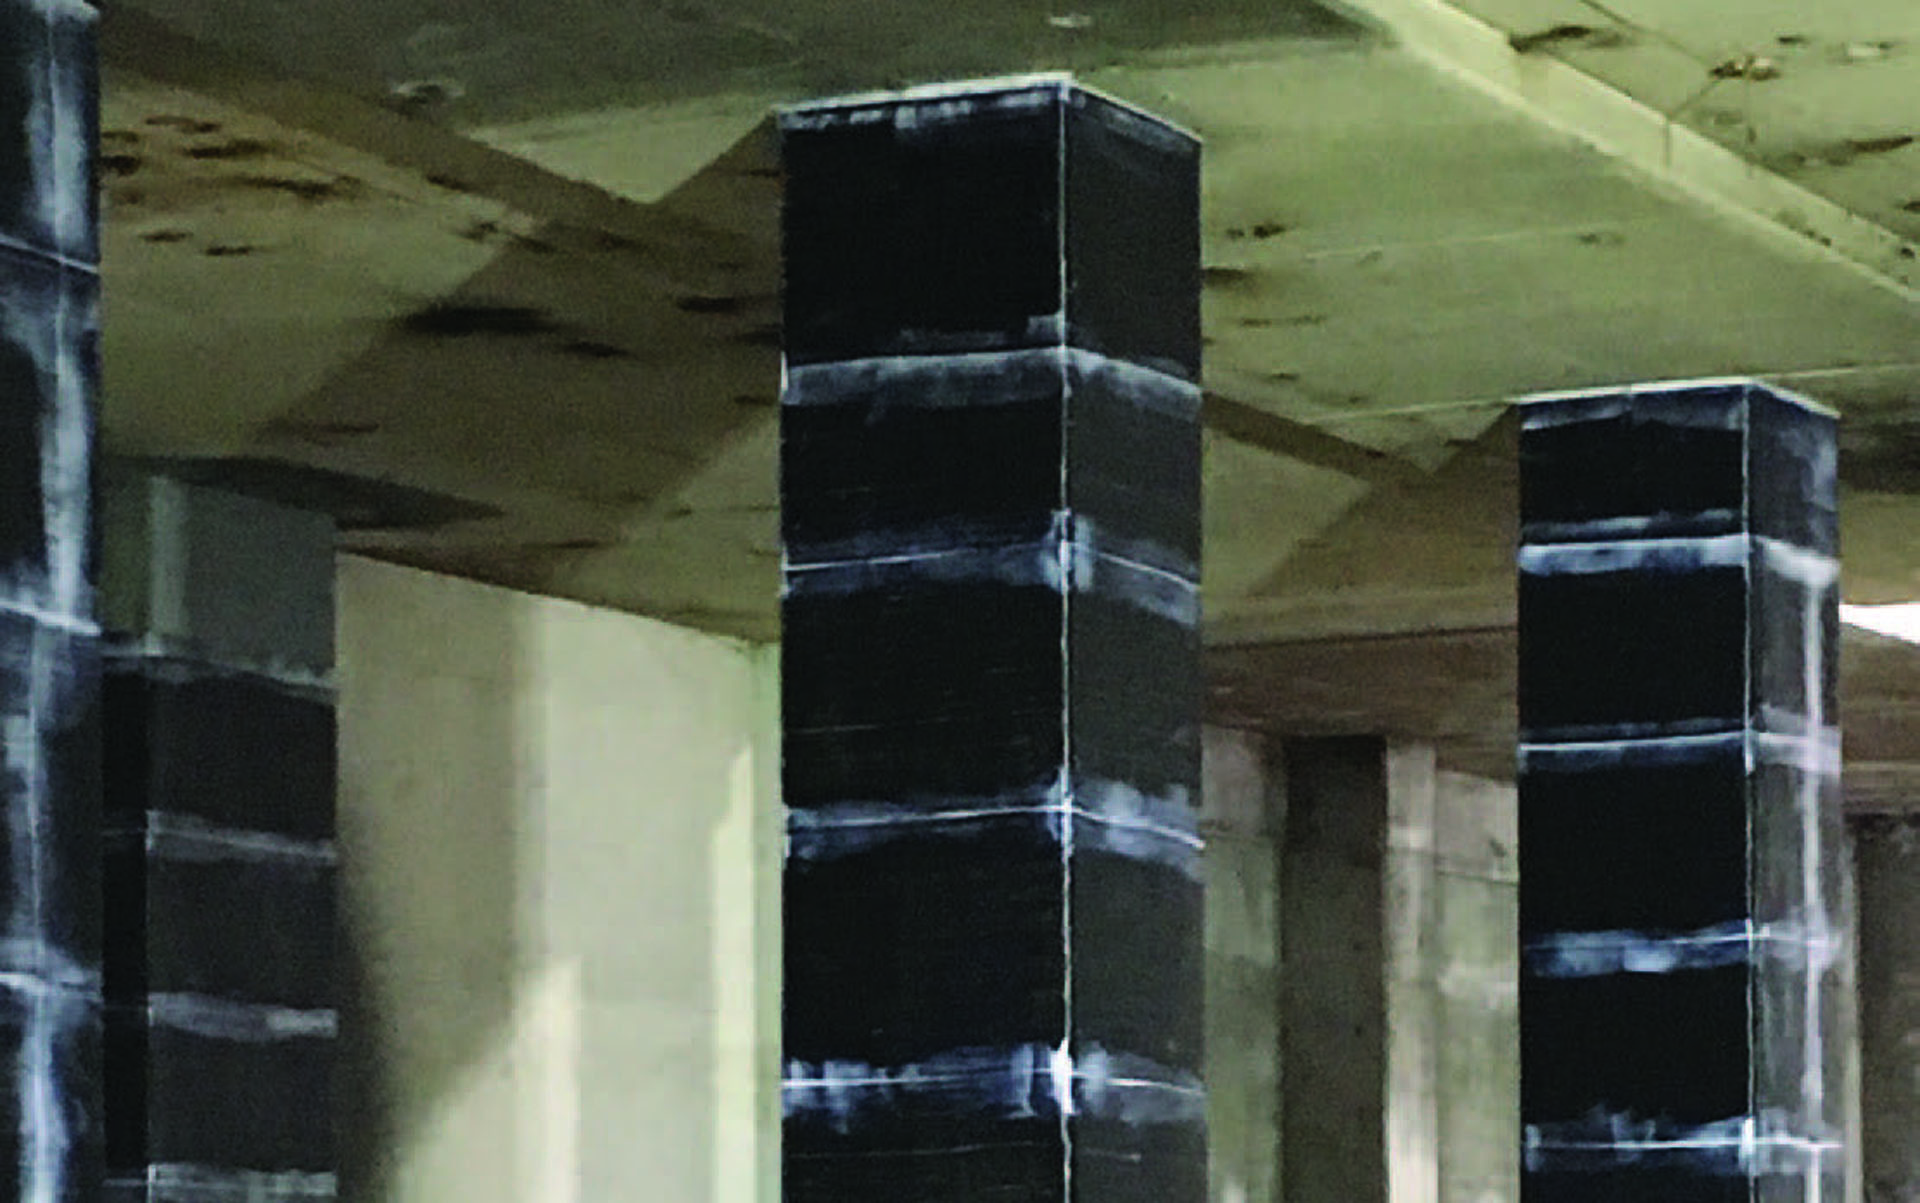 Column retrofit in lower levels of structure